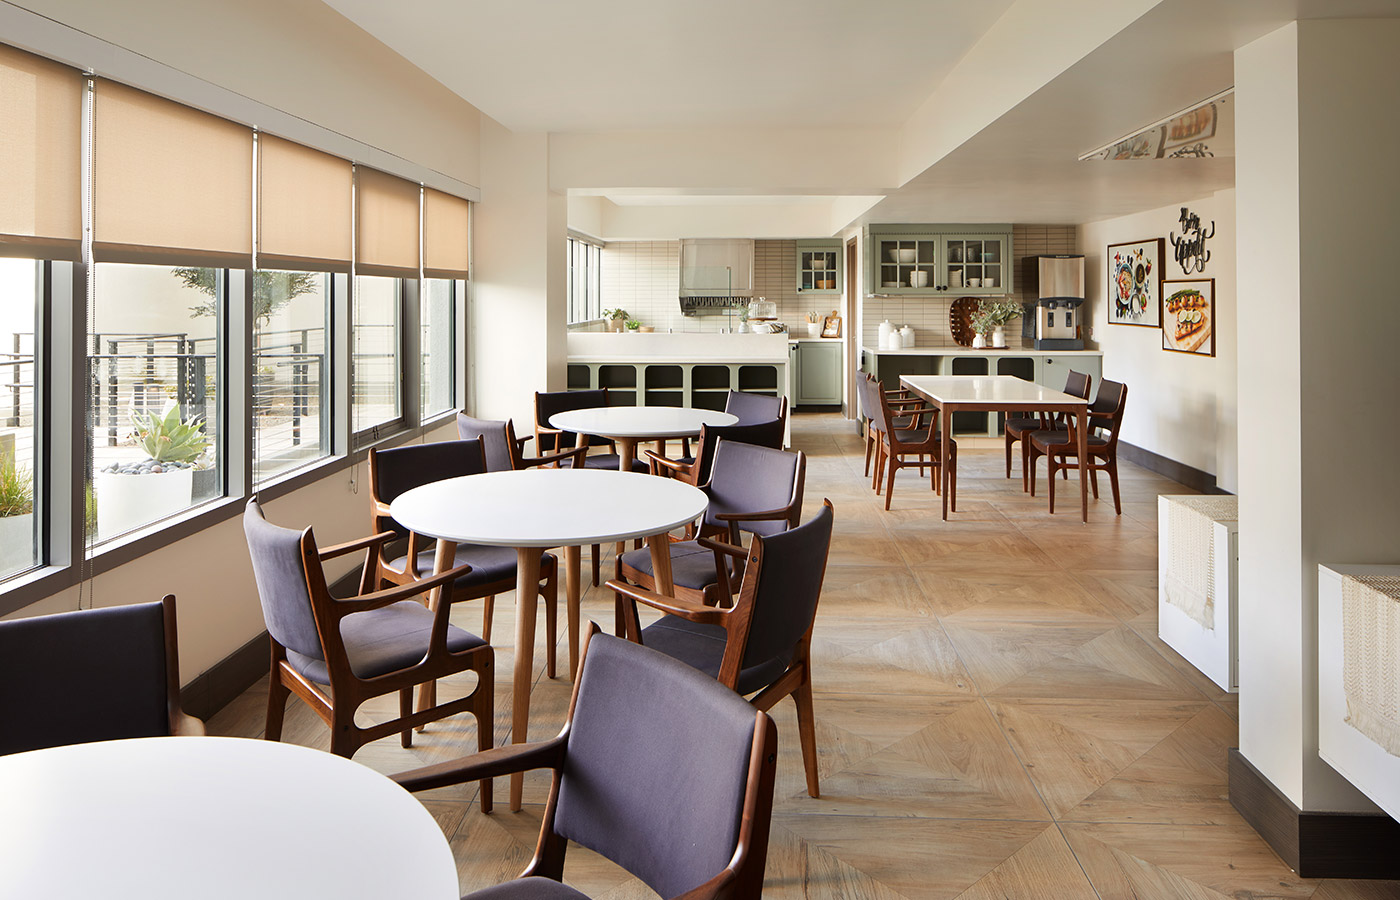 The dining area at The Watermark at Westwood Village.